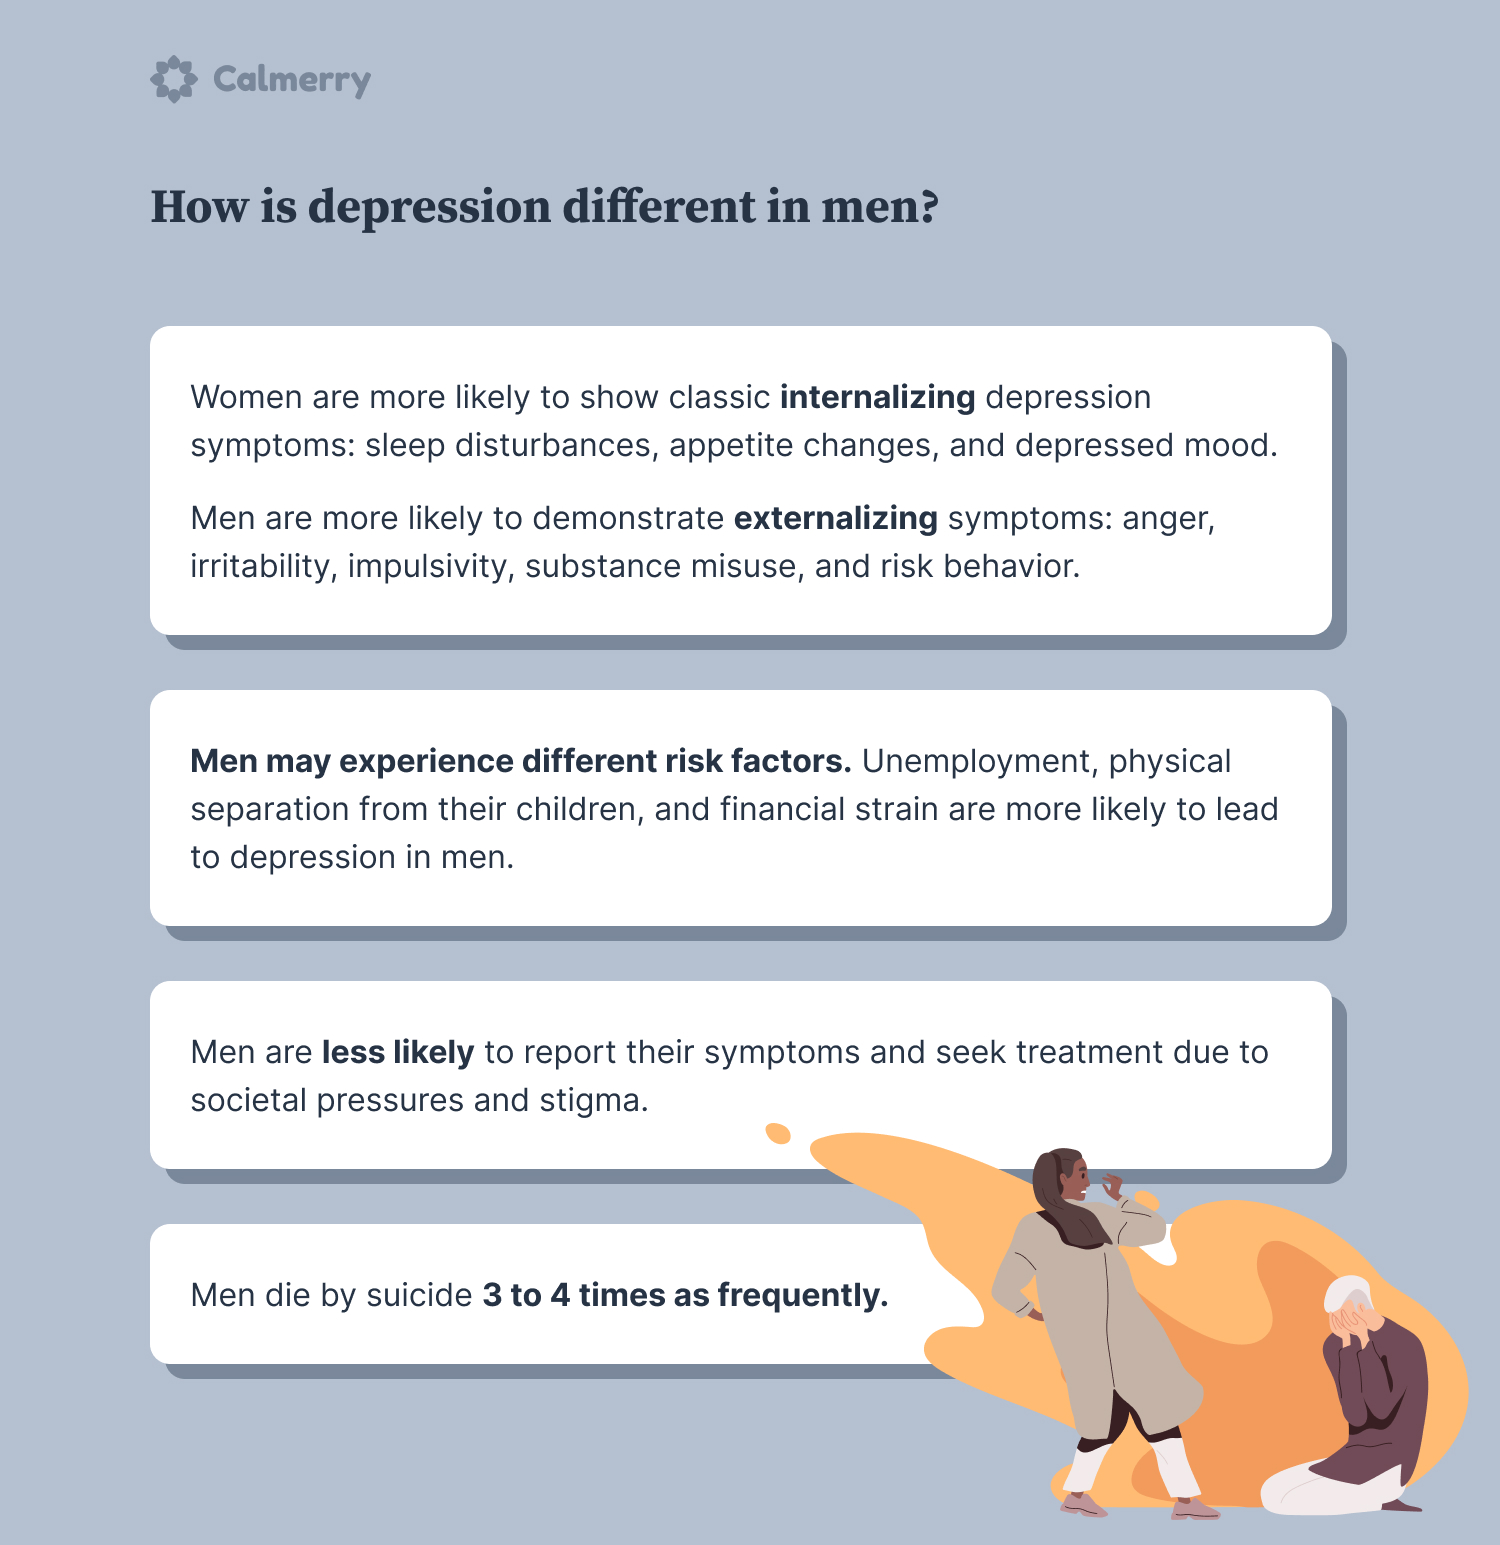 How is depression different in men? Women are more likely to show classic internalizing depression symptoms: sleep disturbances, appetite changes, and depressed mood. Men are more likely to demonstrate externalizing symptoms: anger, irritability, impulsivity, substance misuse, and risk behavior. Men may experience different risk factors. Unemployment, physical separation from their children, and financial strain are more likely to lead to depression in men. Men are less likely to report their symptoms and seek treatment due to societal pressures and stigma. Men die by suicide 3 to 4 times as frequently.